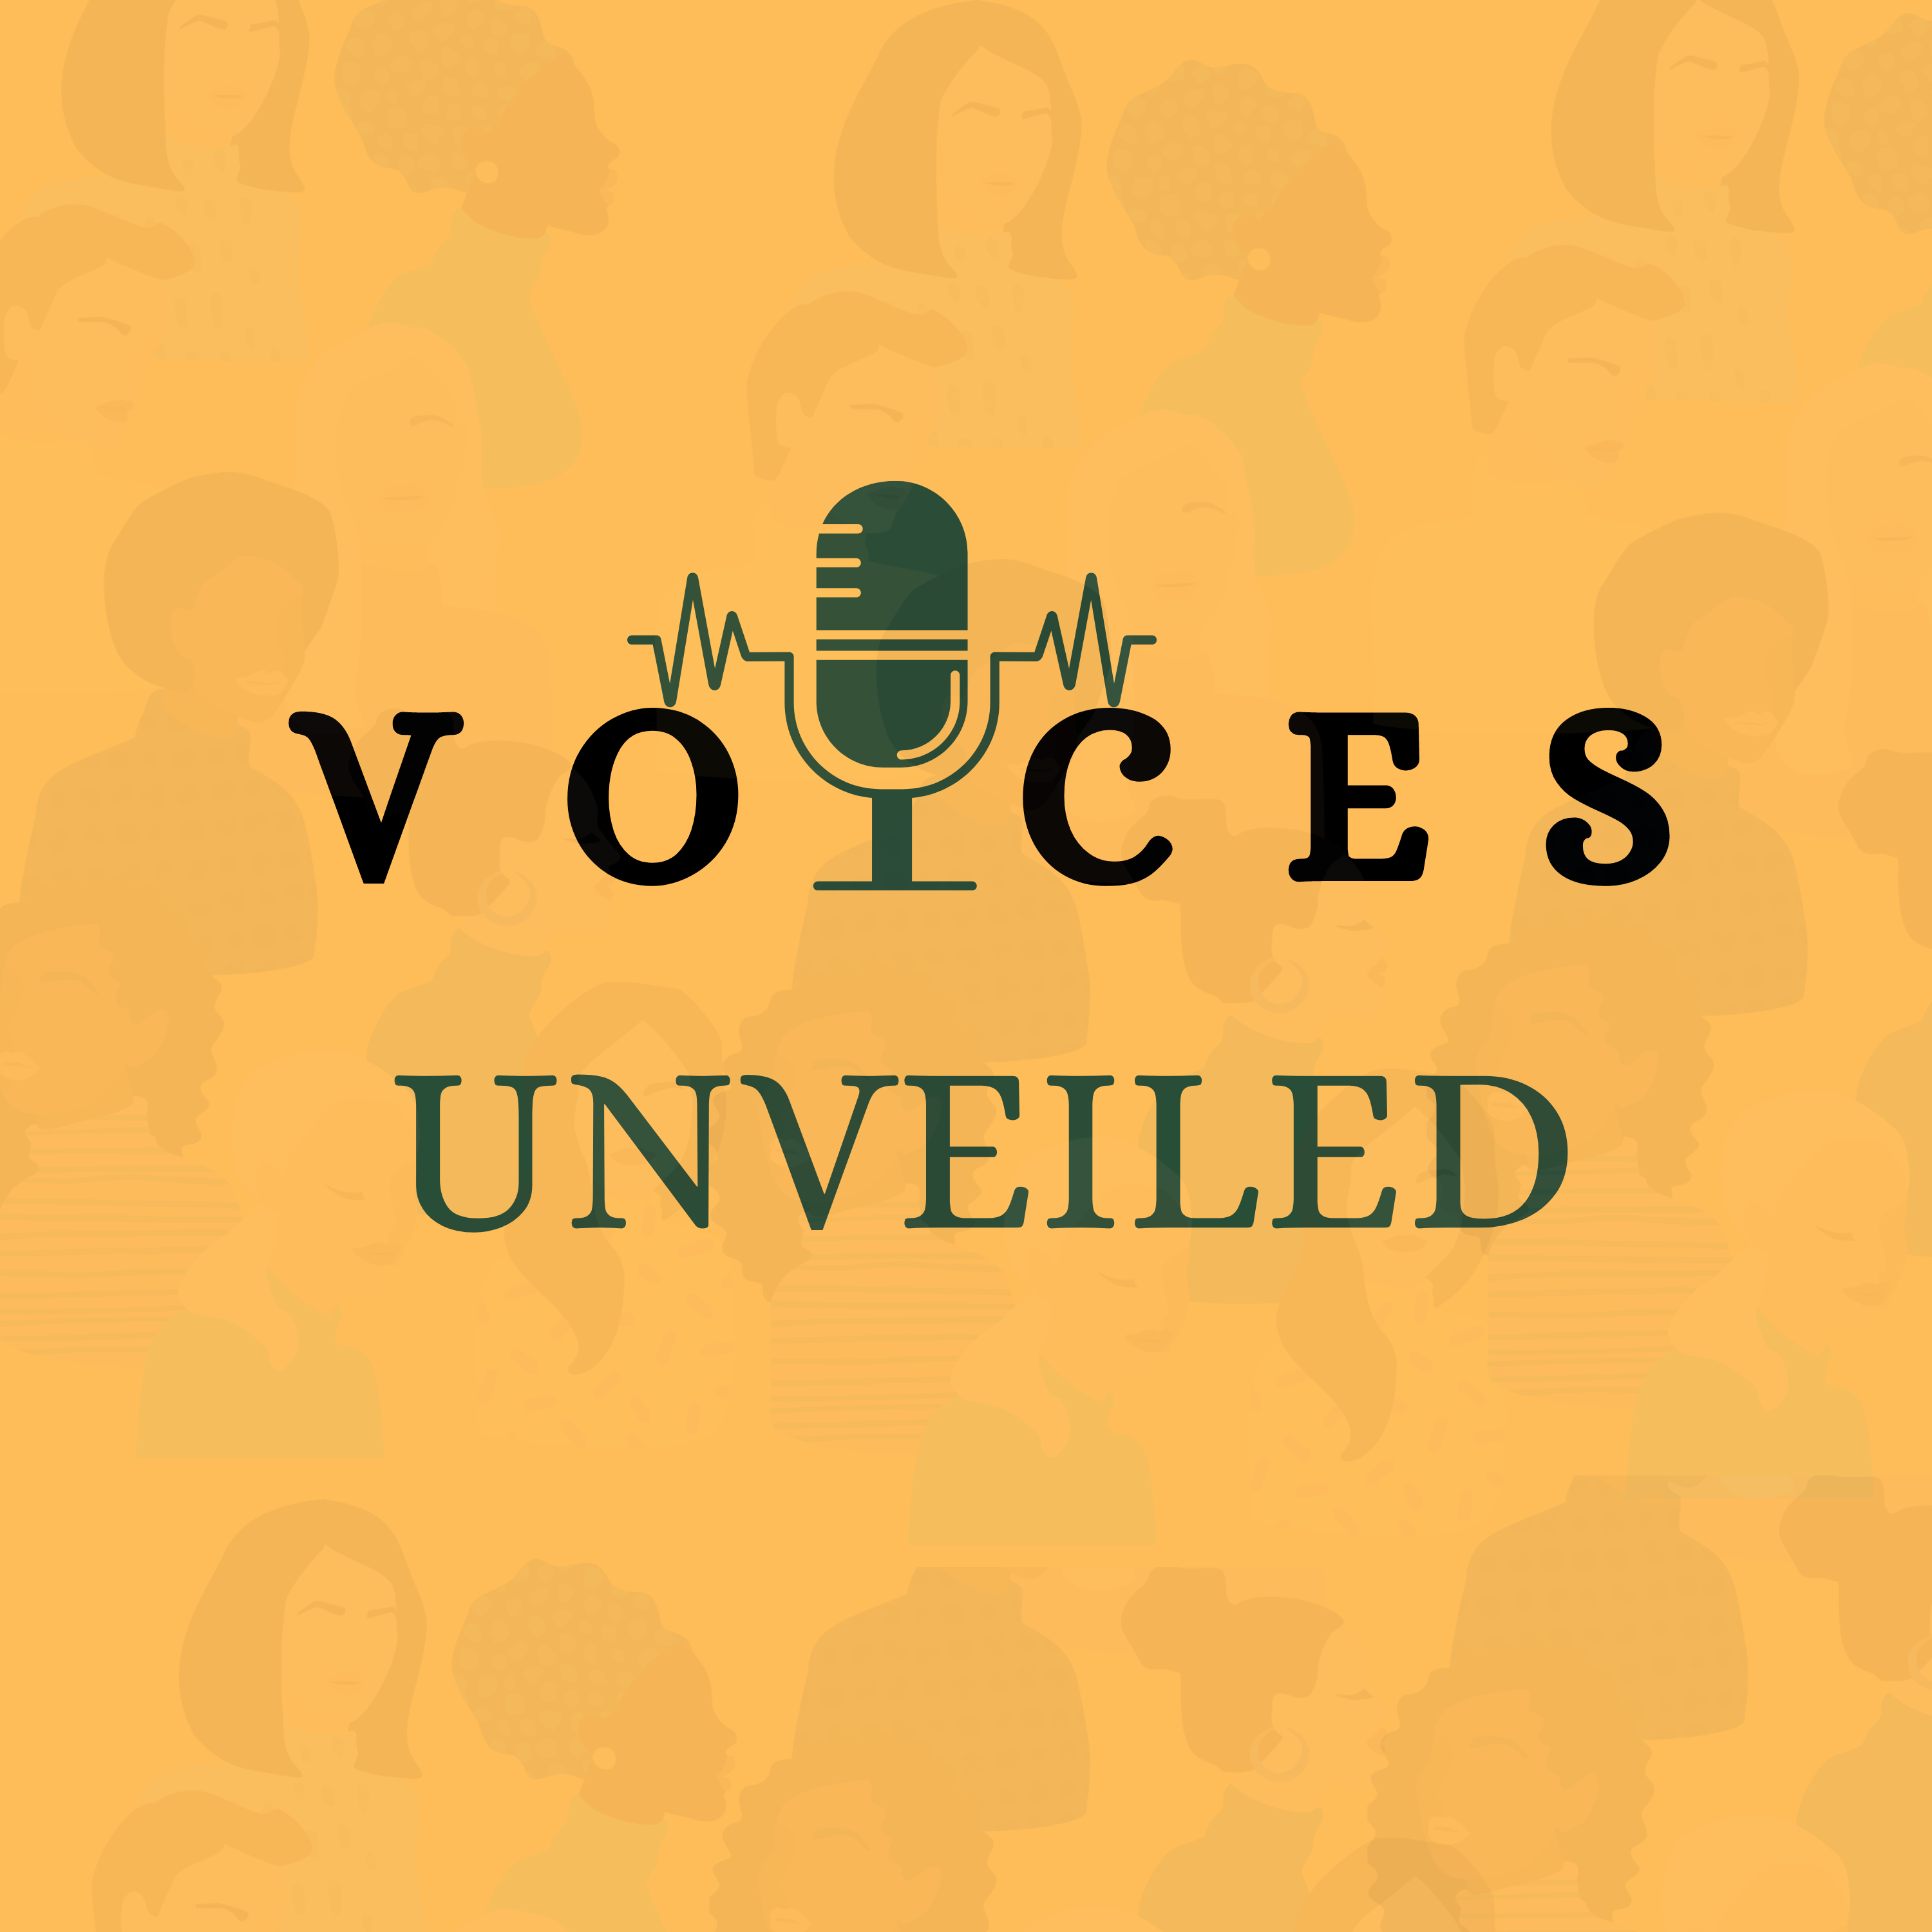 Voices Unveiled: Carving Our Own Paths